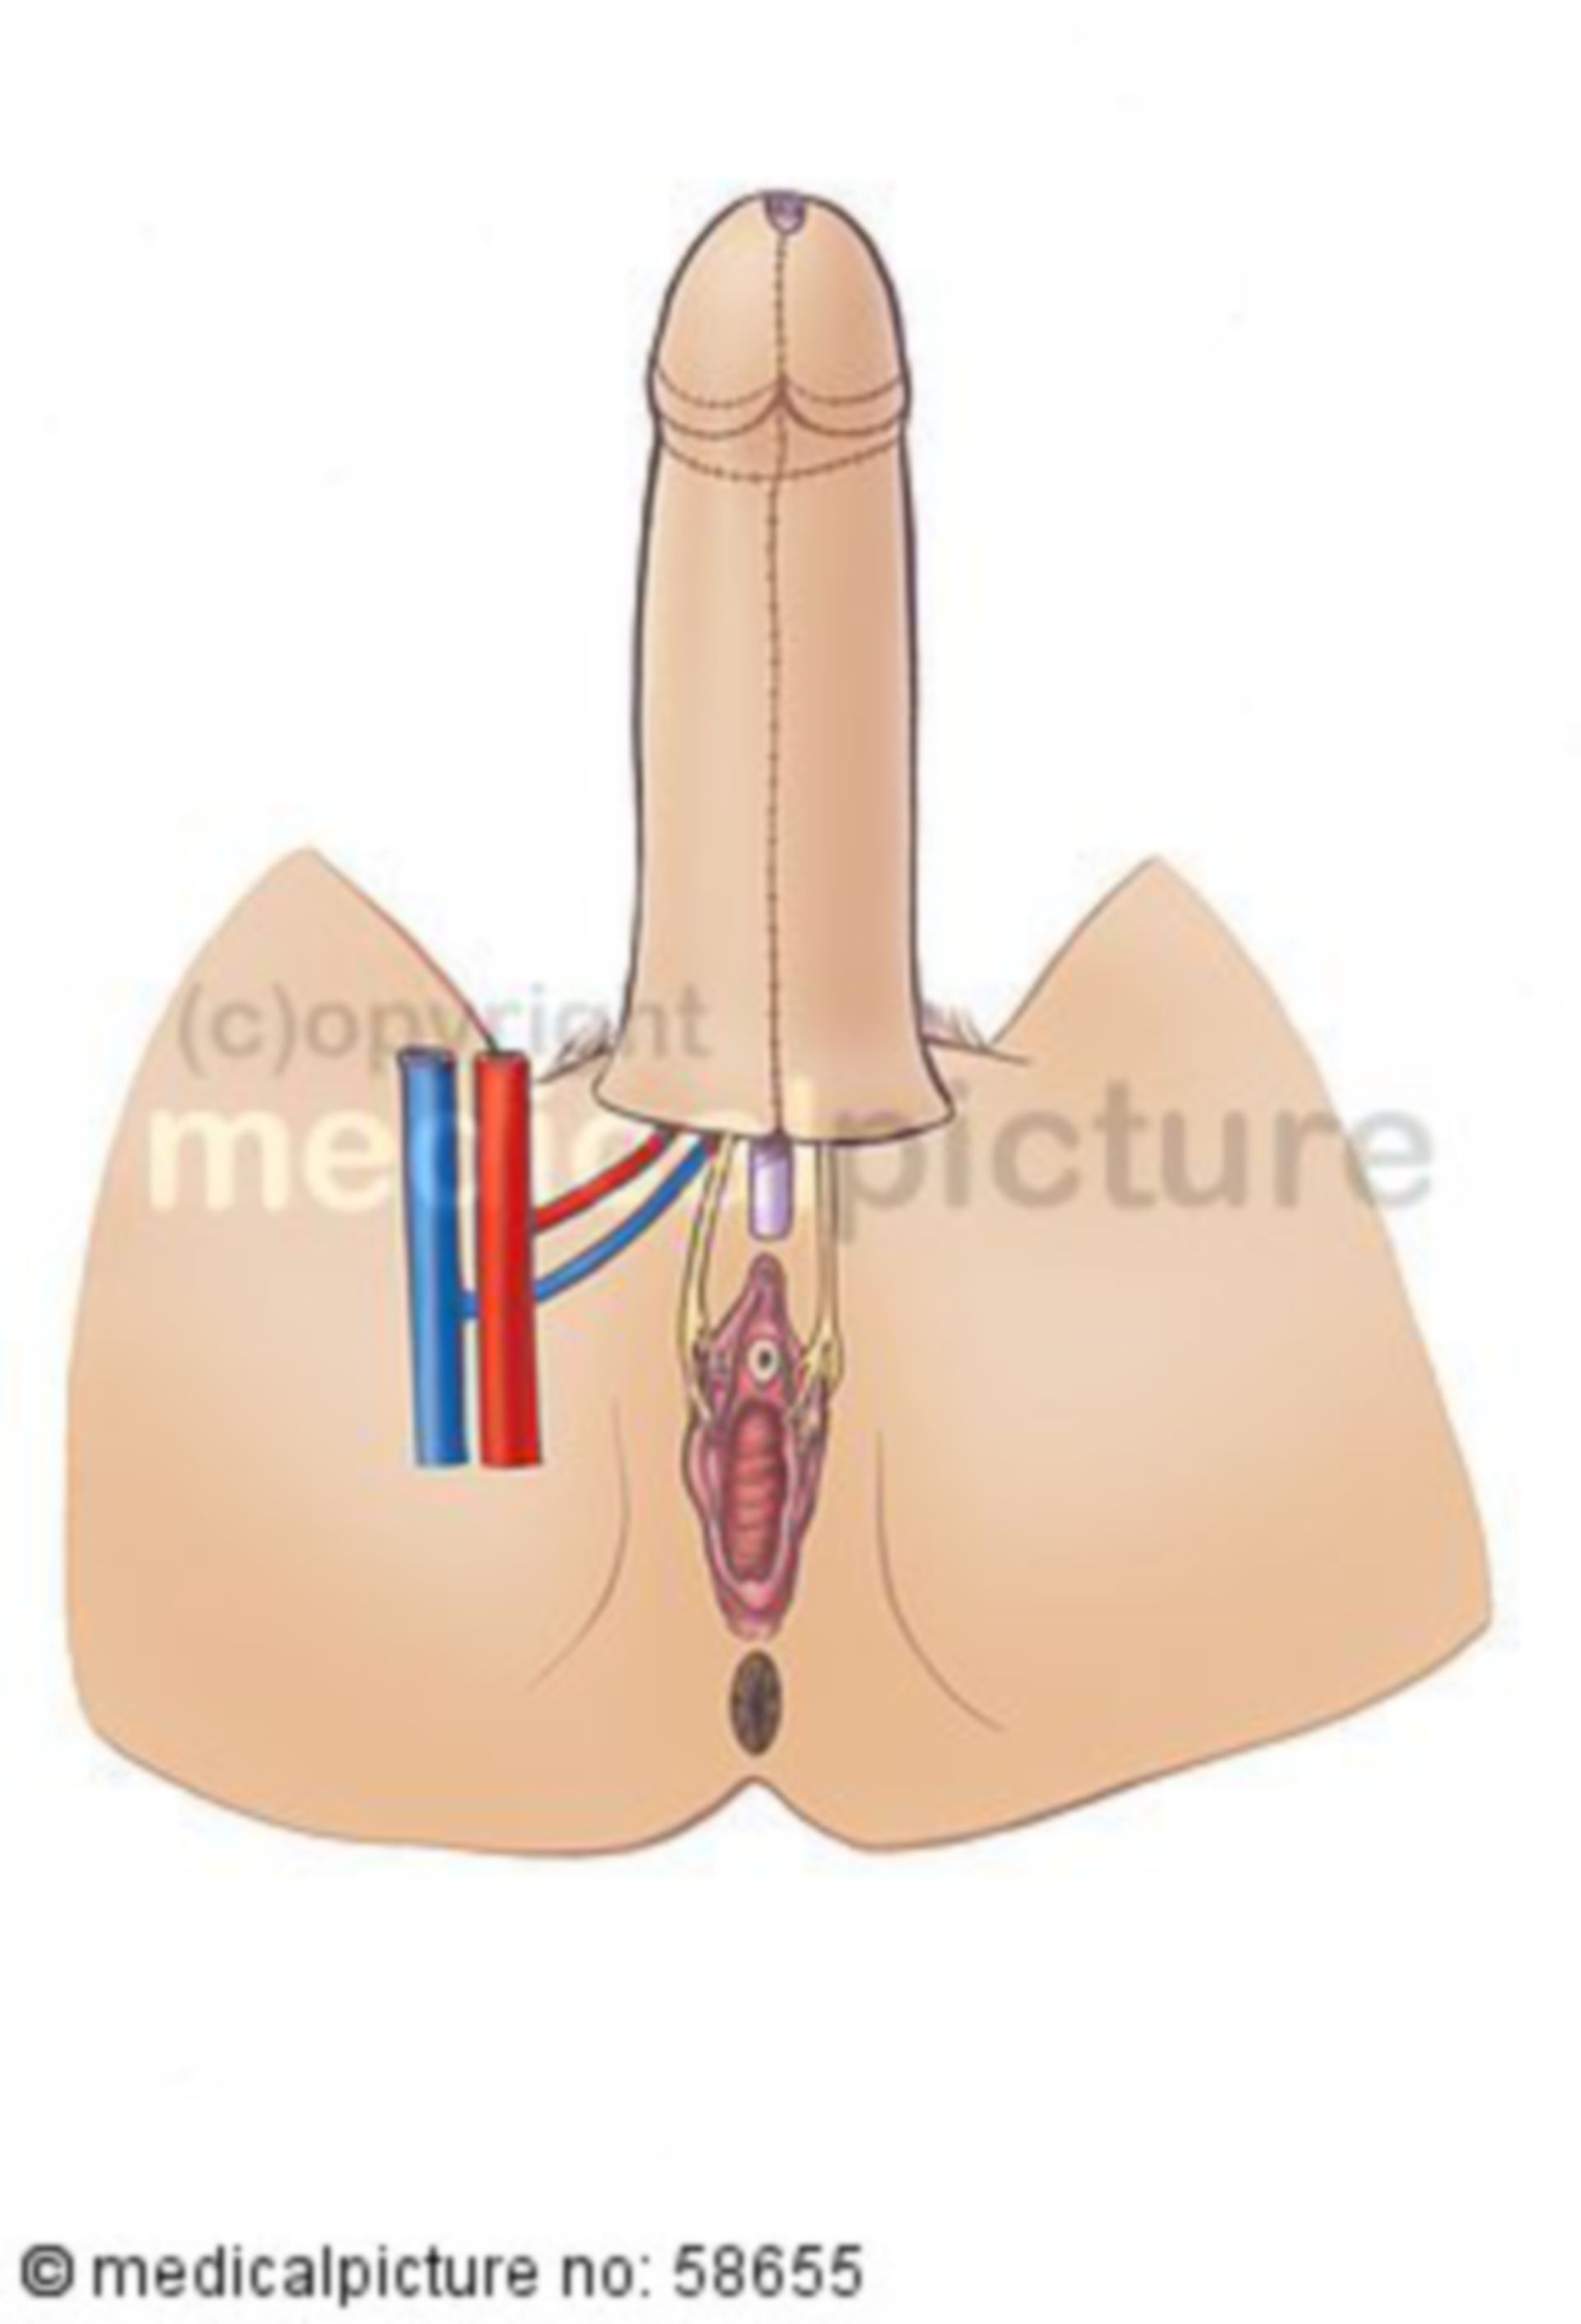 Penis-(re)construction (attachement to female anatomy)